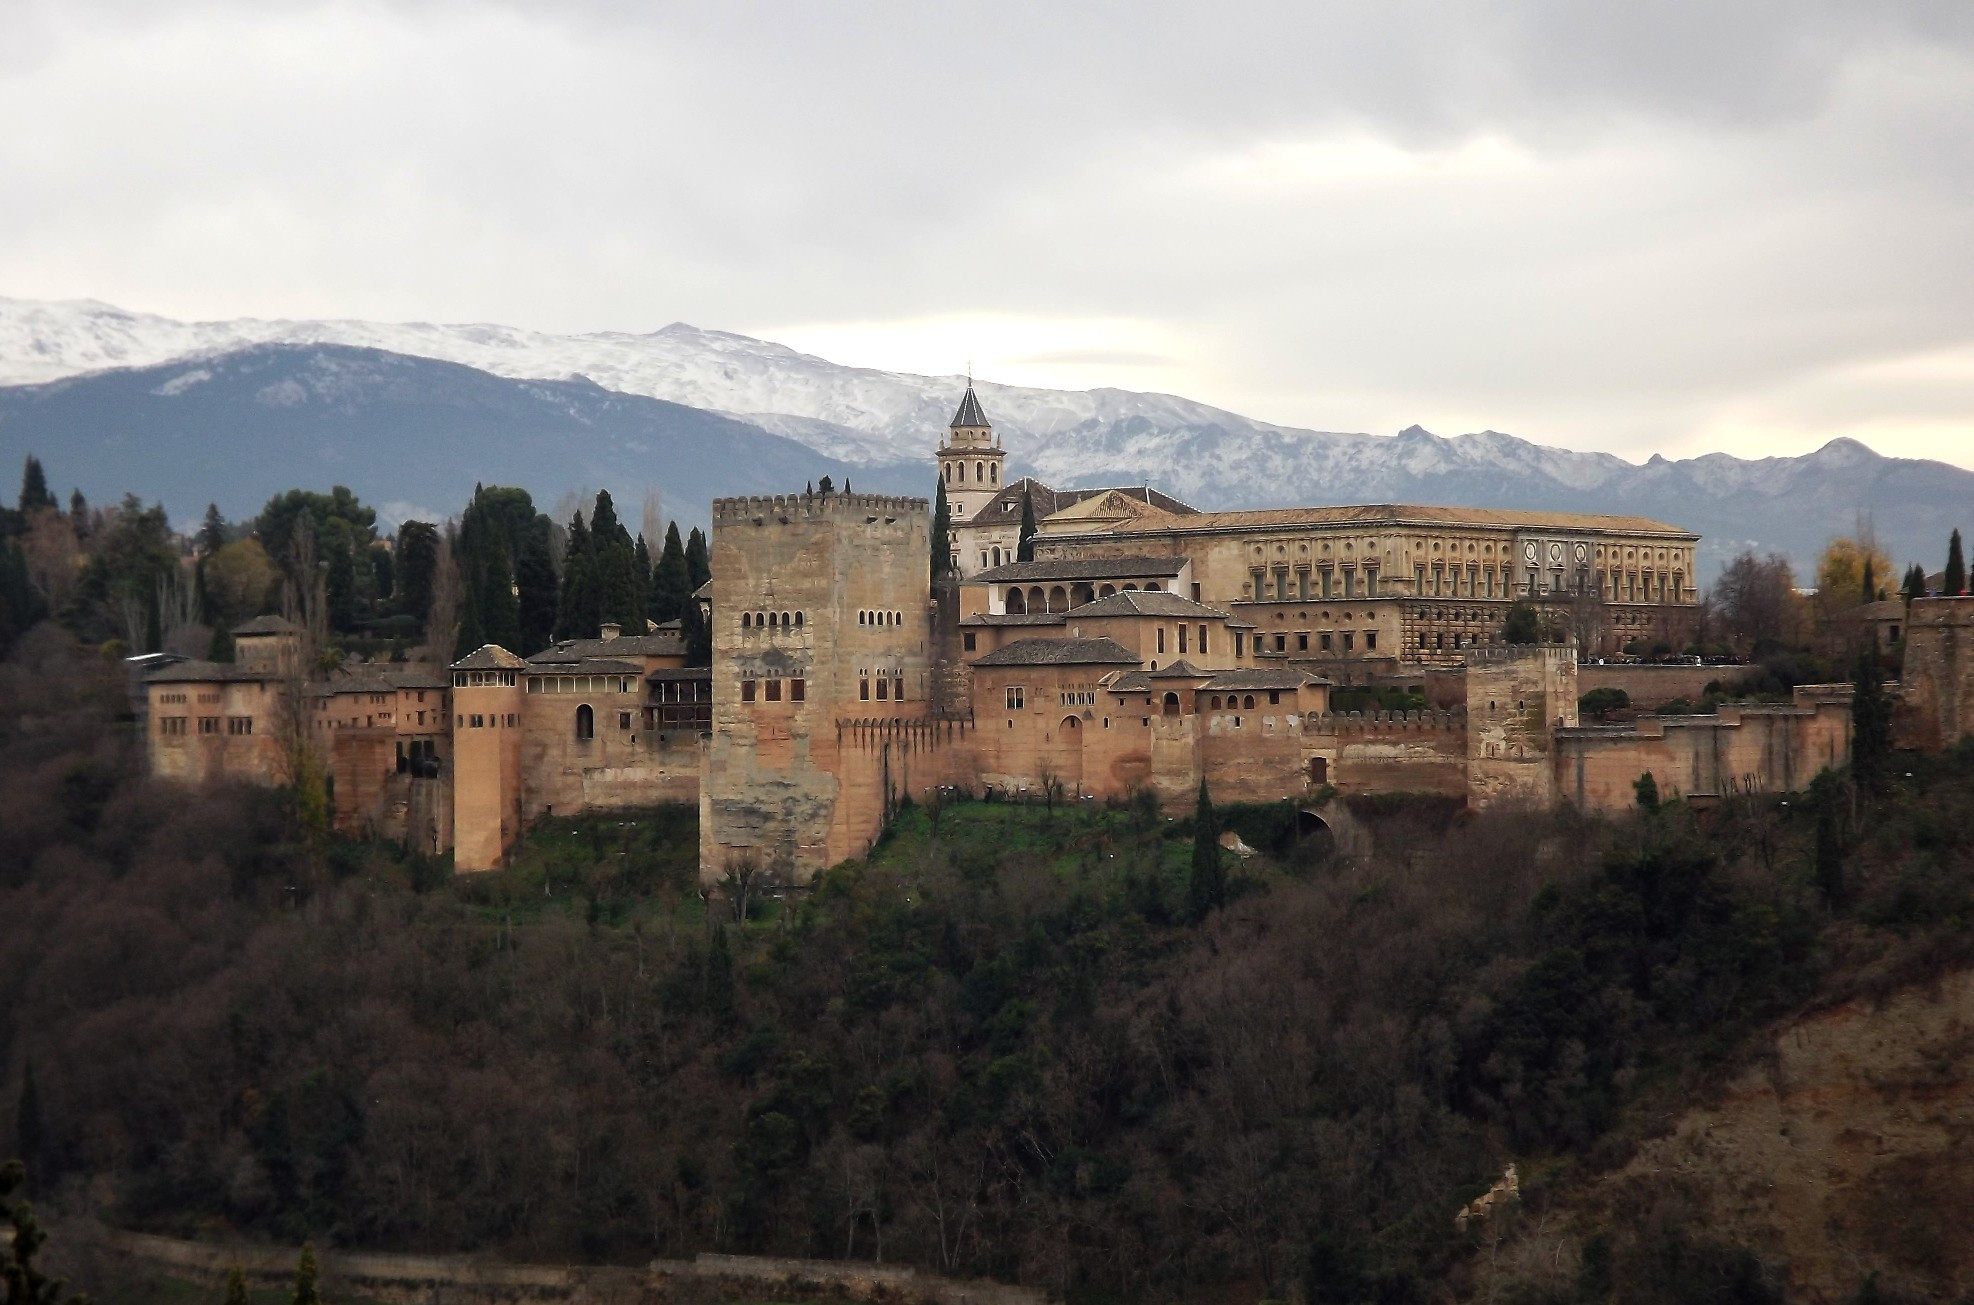 Majestic Alhambra Palace and fortress built by the Islamic Moors who ruled Spain for 7 centuries, seen with the backdrop of snow-capped Sierra Nevada mountains, in Granada, Spain.